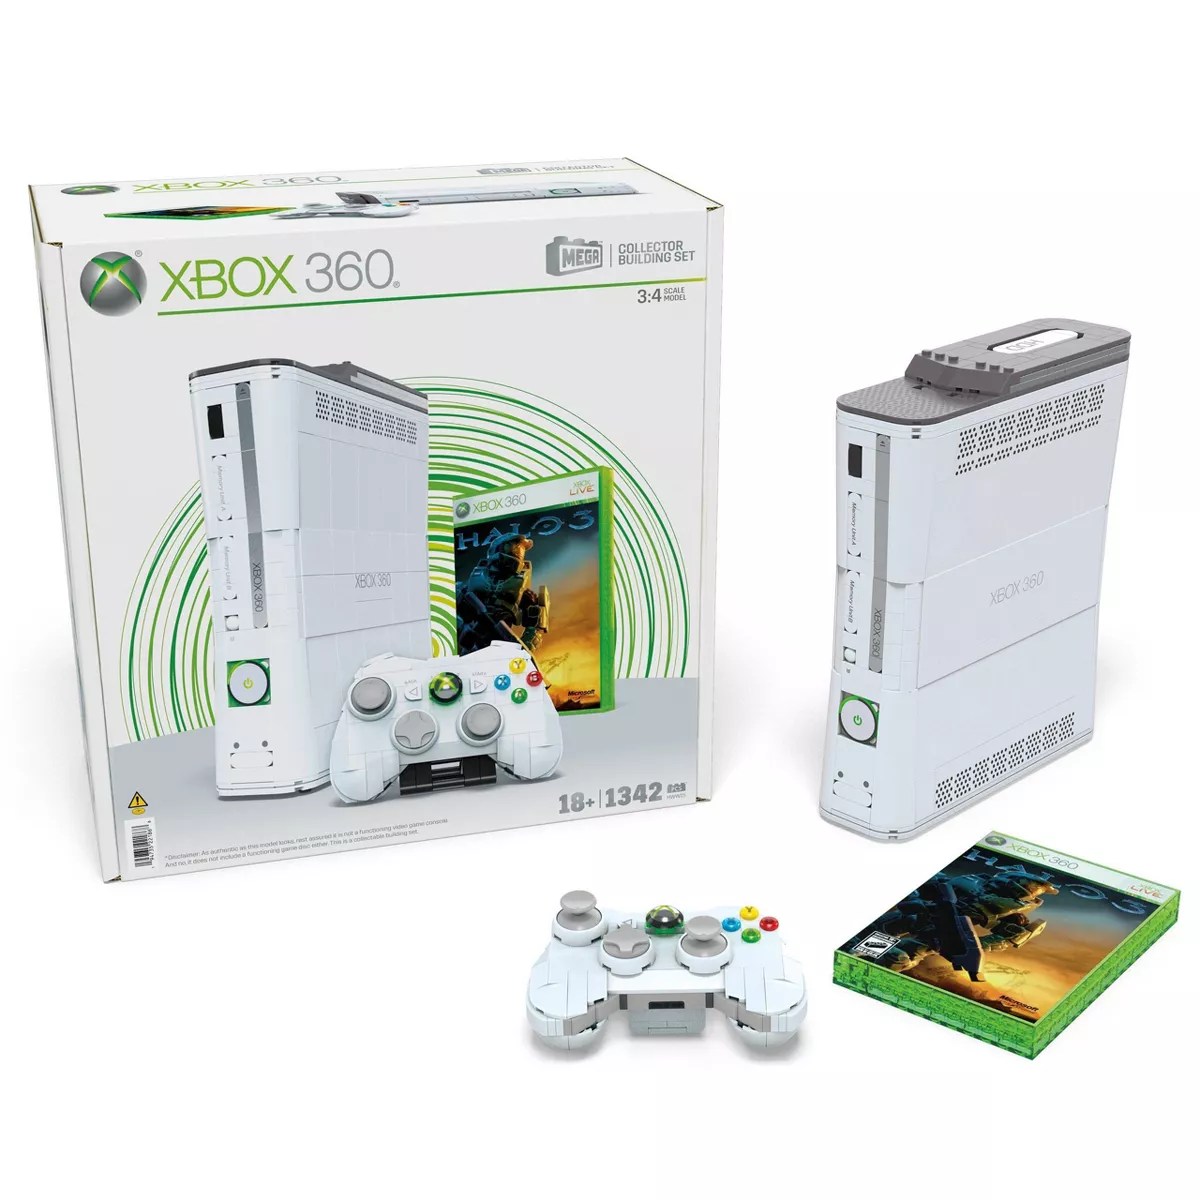 It Takes Two - Xbox One/series X : Target